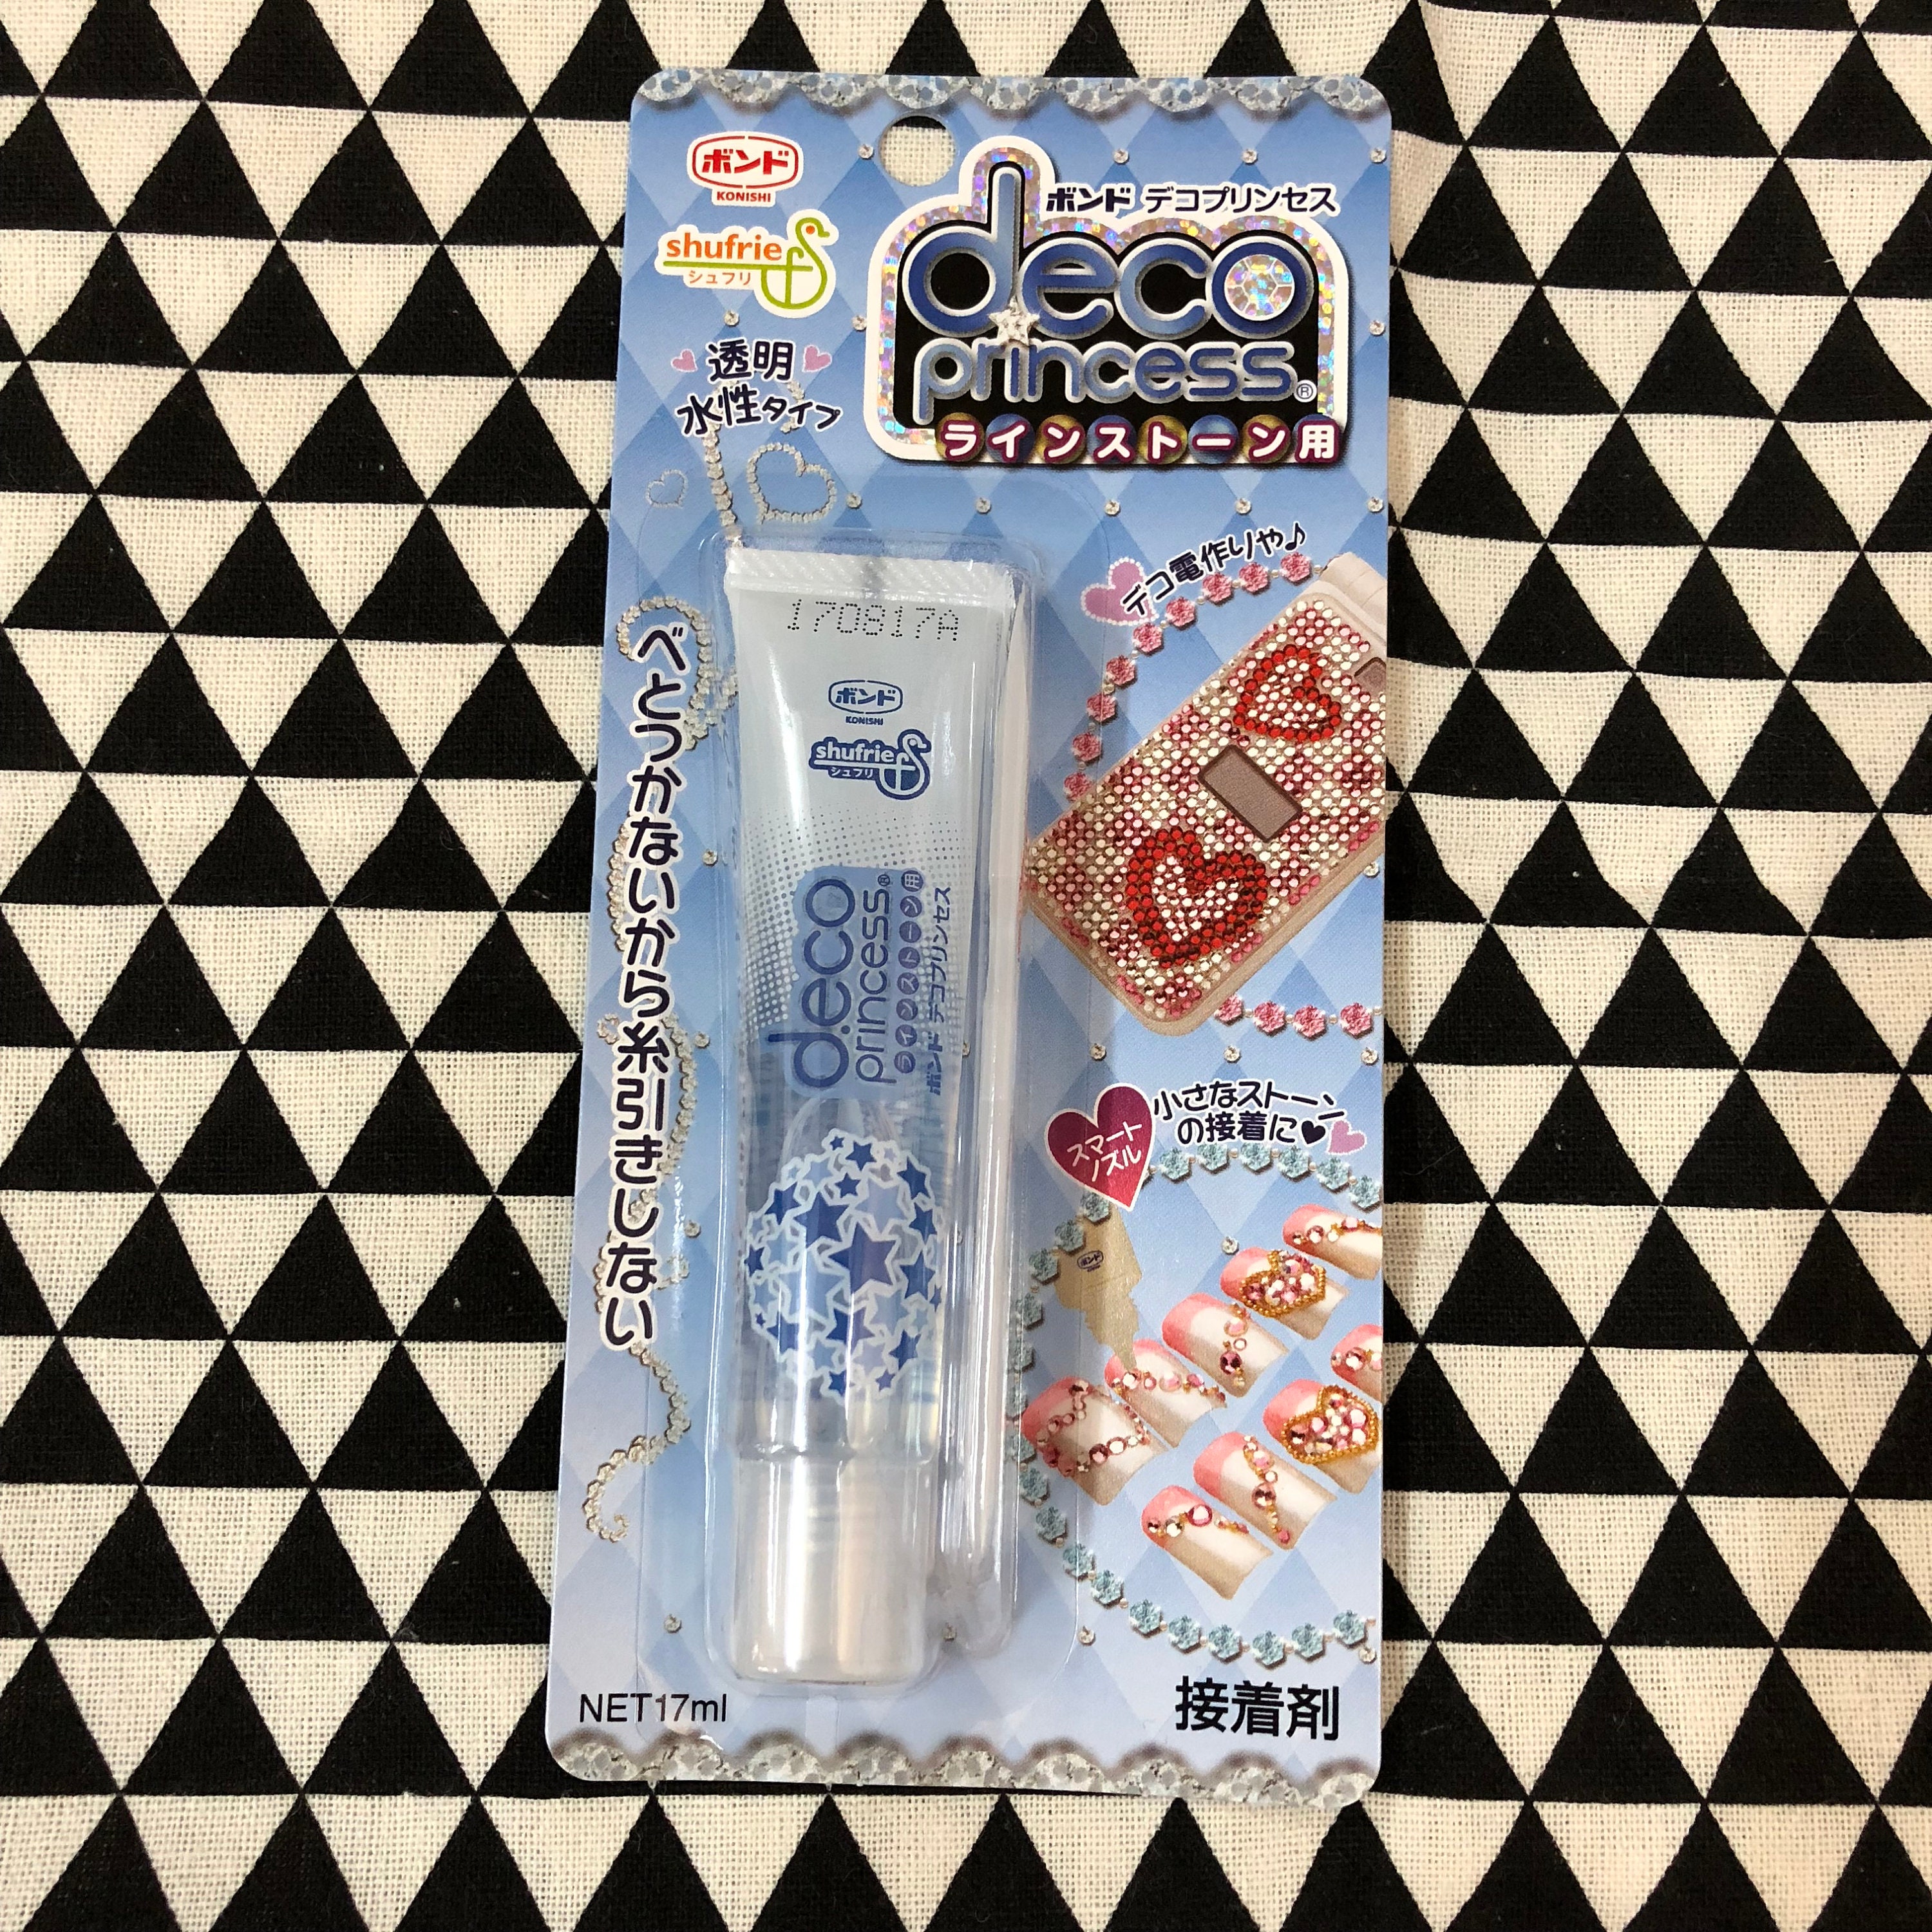 Deco Princess Rhinestone Glue From Japan Water Based Adhesive for